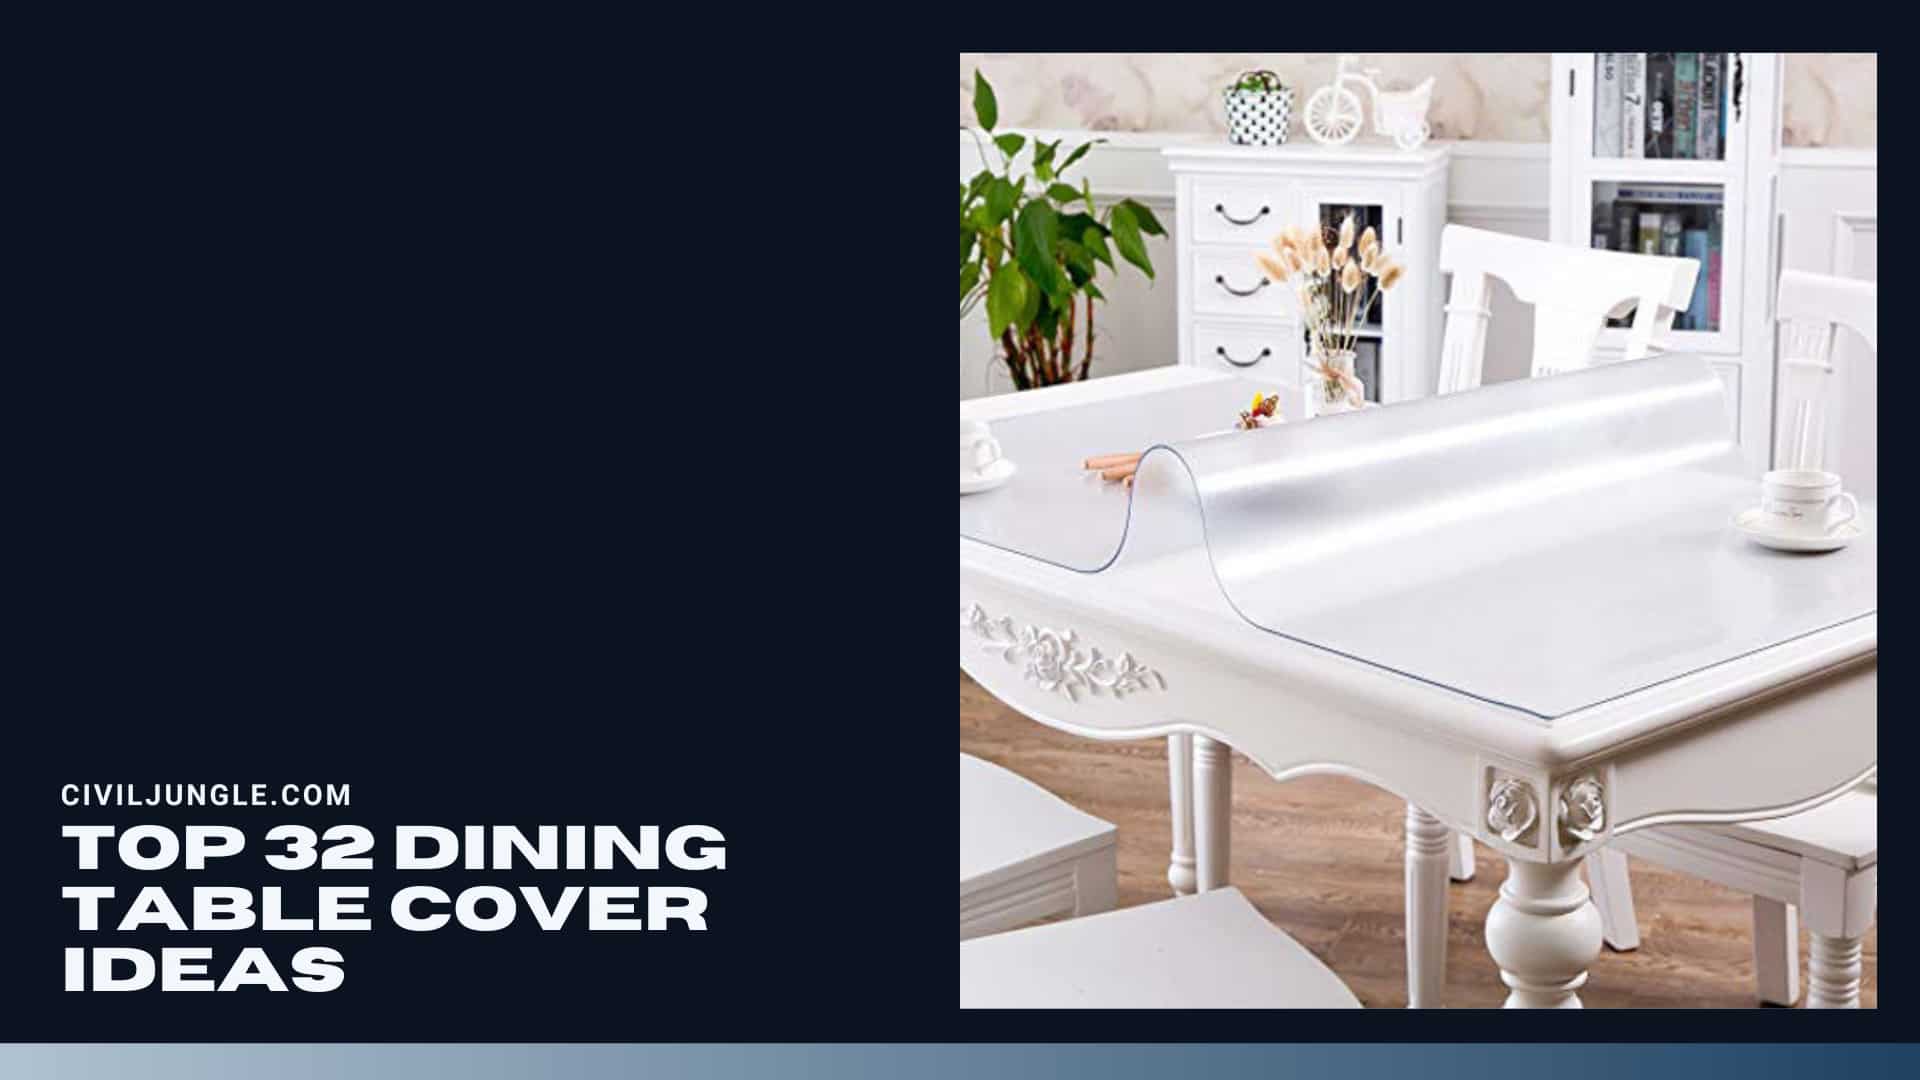 Top 32 Dining Table Cover Ideas